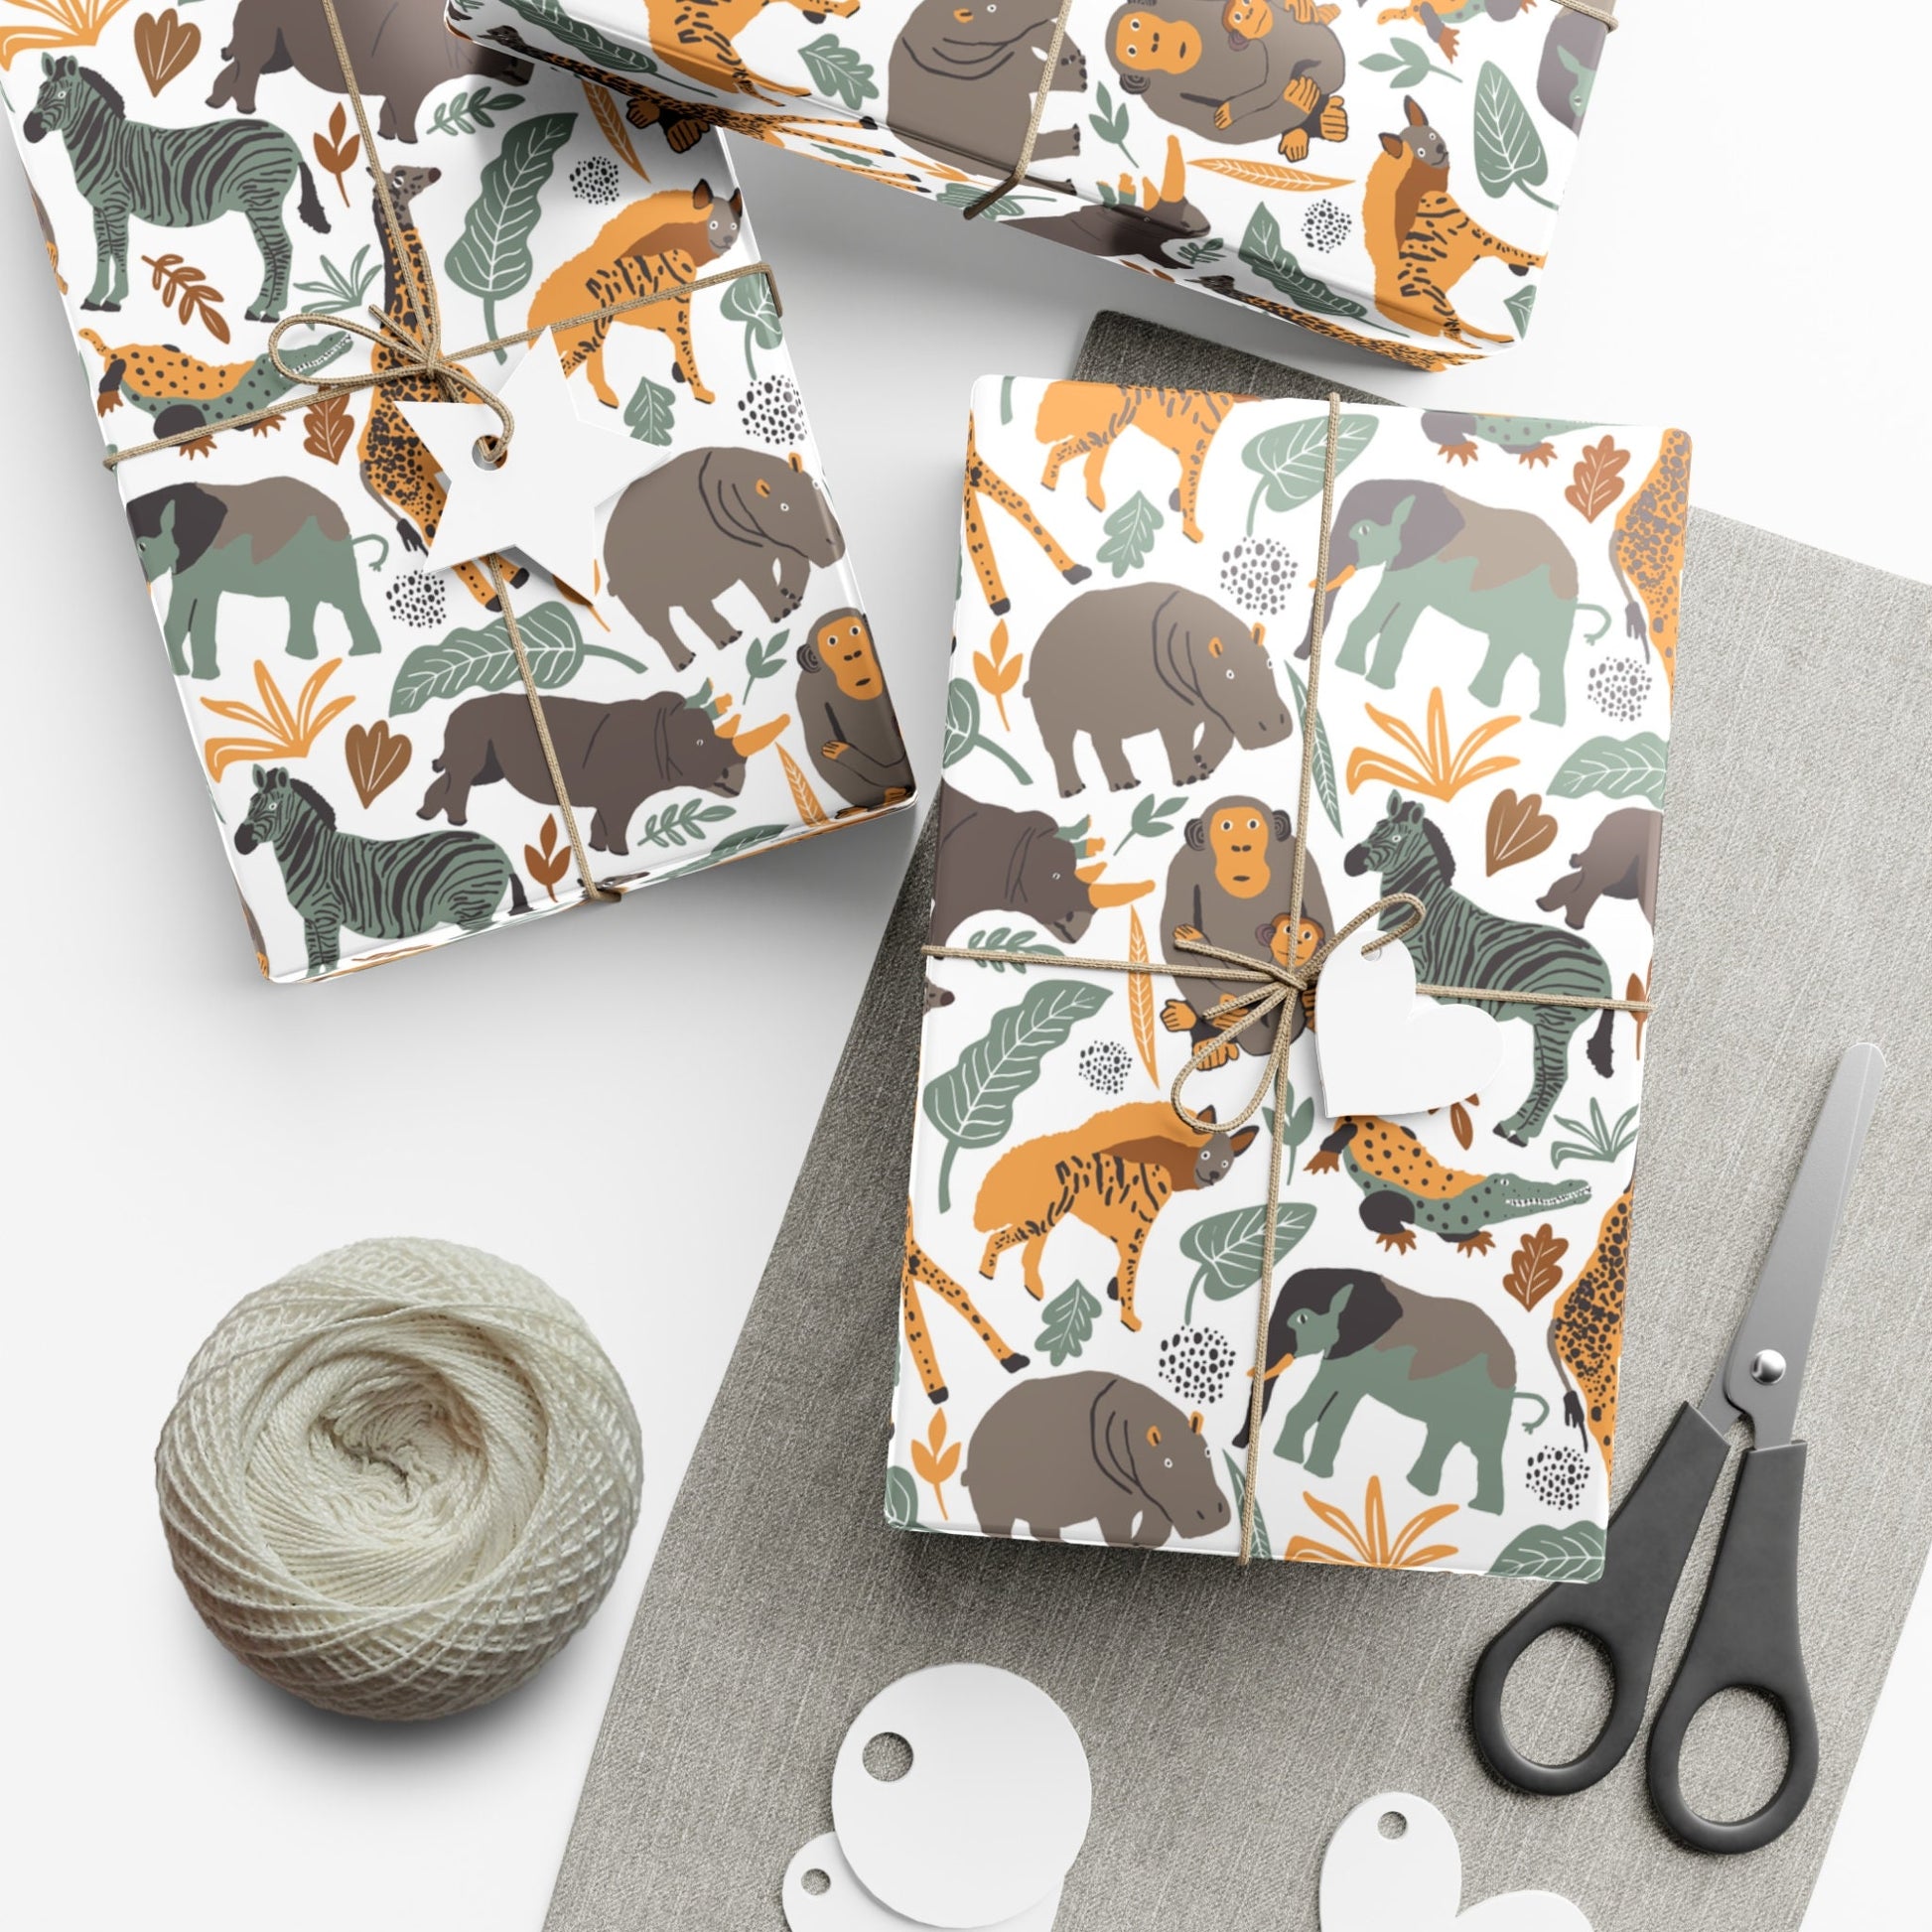 Cute Safari Wrapping Paper, Animal Birthday Wrapping Paper, Amazonian Gift Wrap, Safari Party, Gift Present Paper Roll for Her